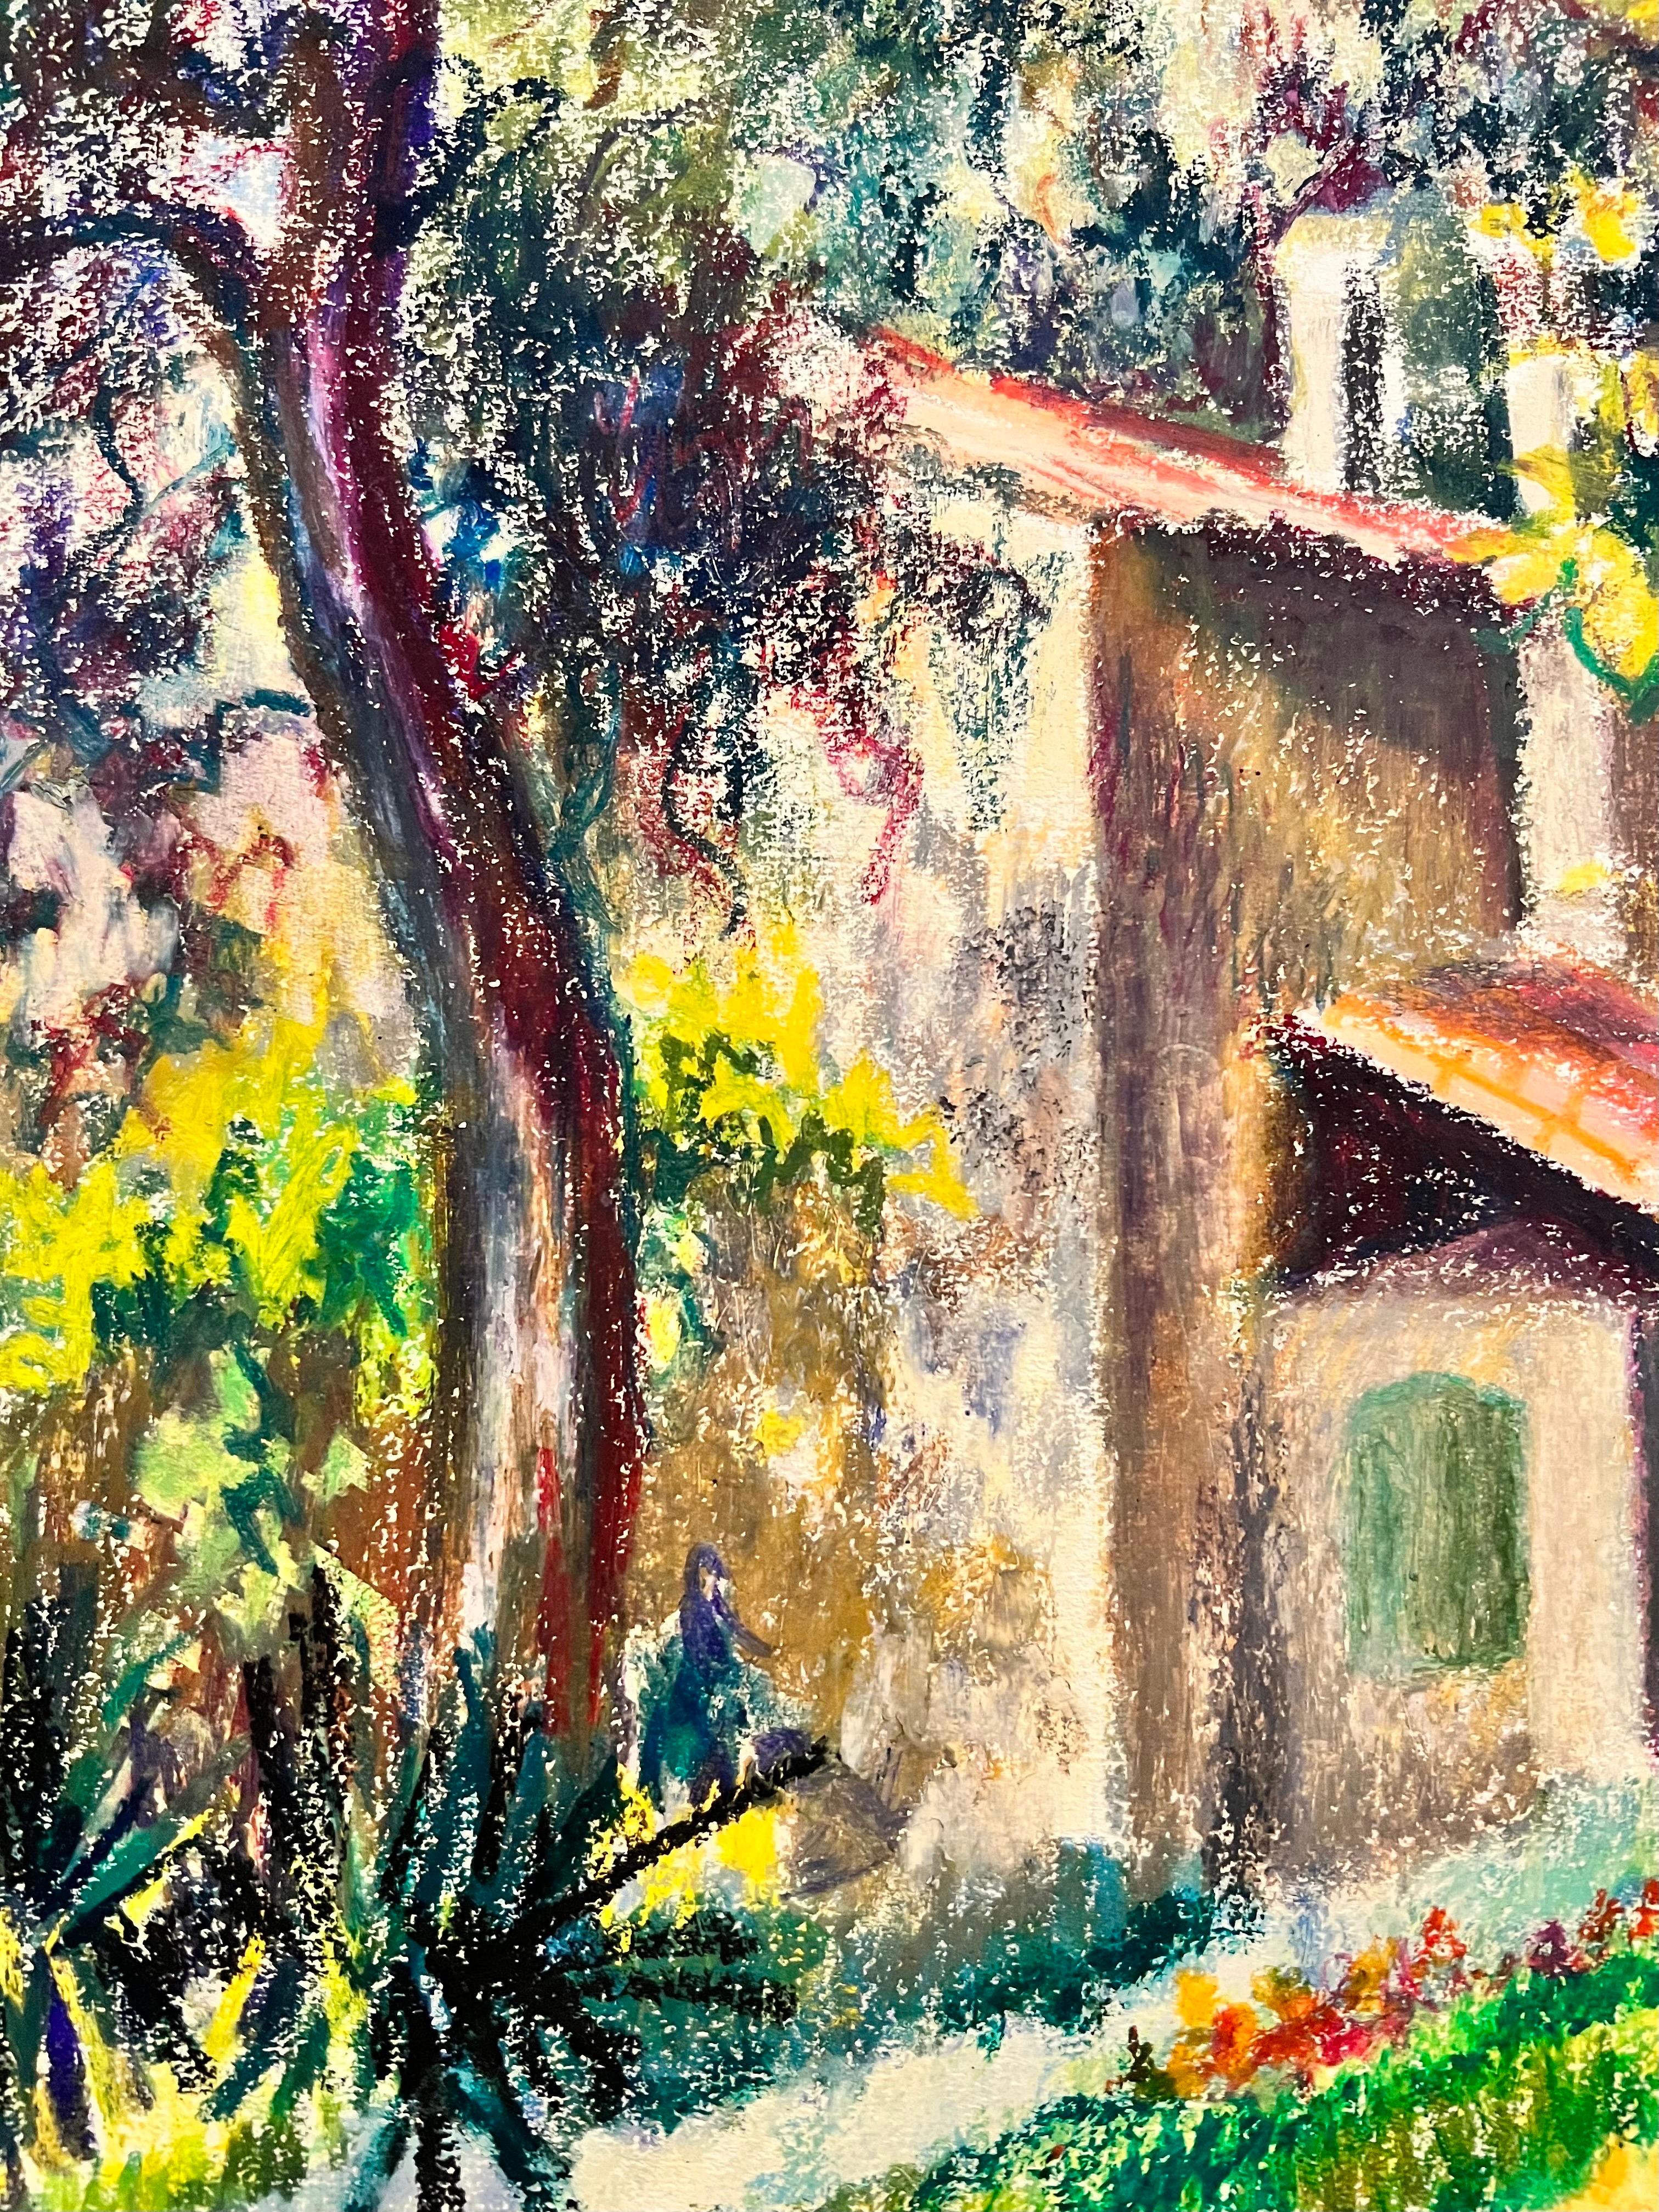 French Chateau
by Josine Vignon (French 1922-2022)
signed and stamped verso
oil pastel painting on artist paper, unframed
painting: 19.5 x 11 inches

Colors: Green colors, red, blue, red, yellow, and burgandy

Very good condition

Provenance: from